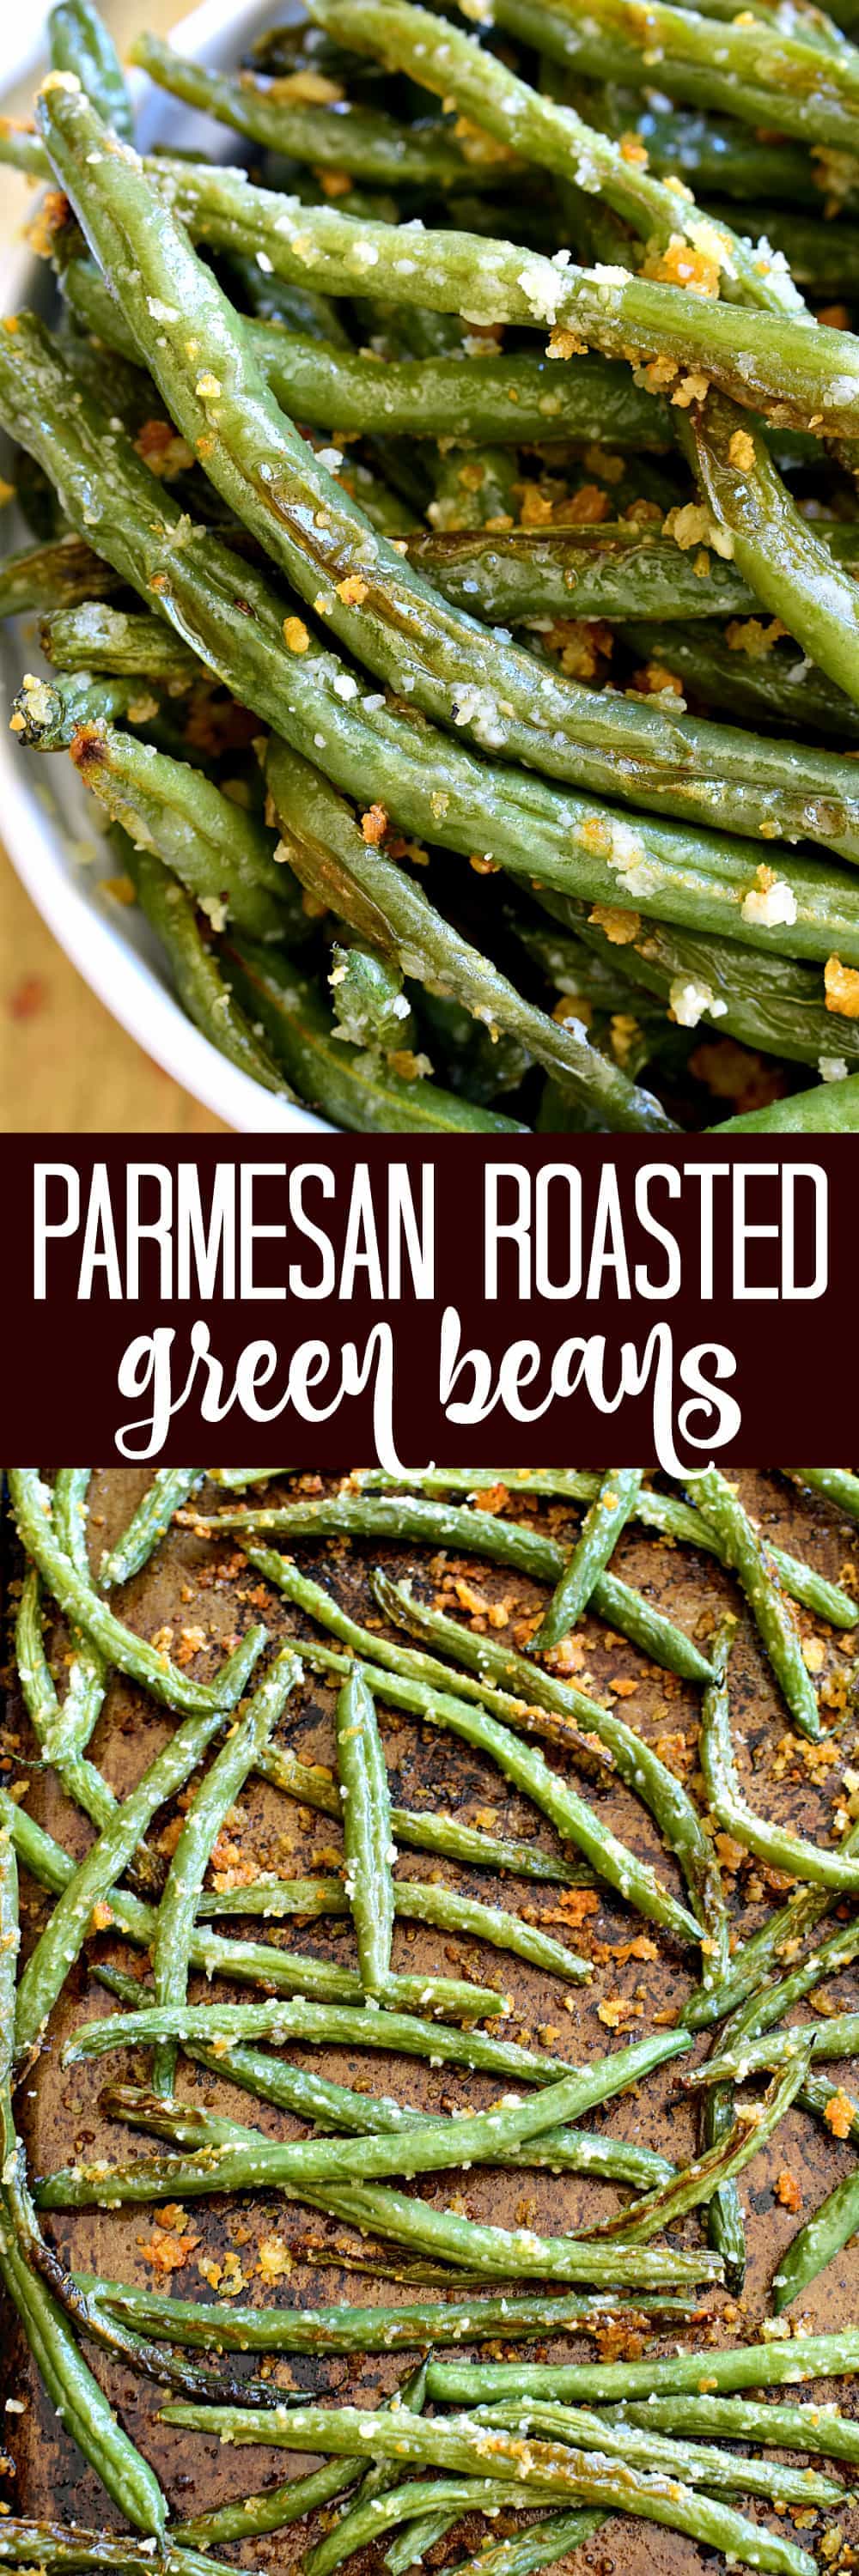 Collage image of Parmesan Roasted Green Beans